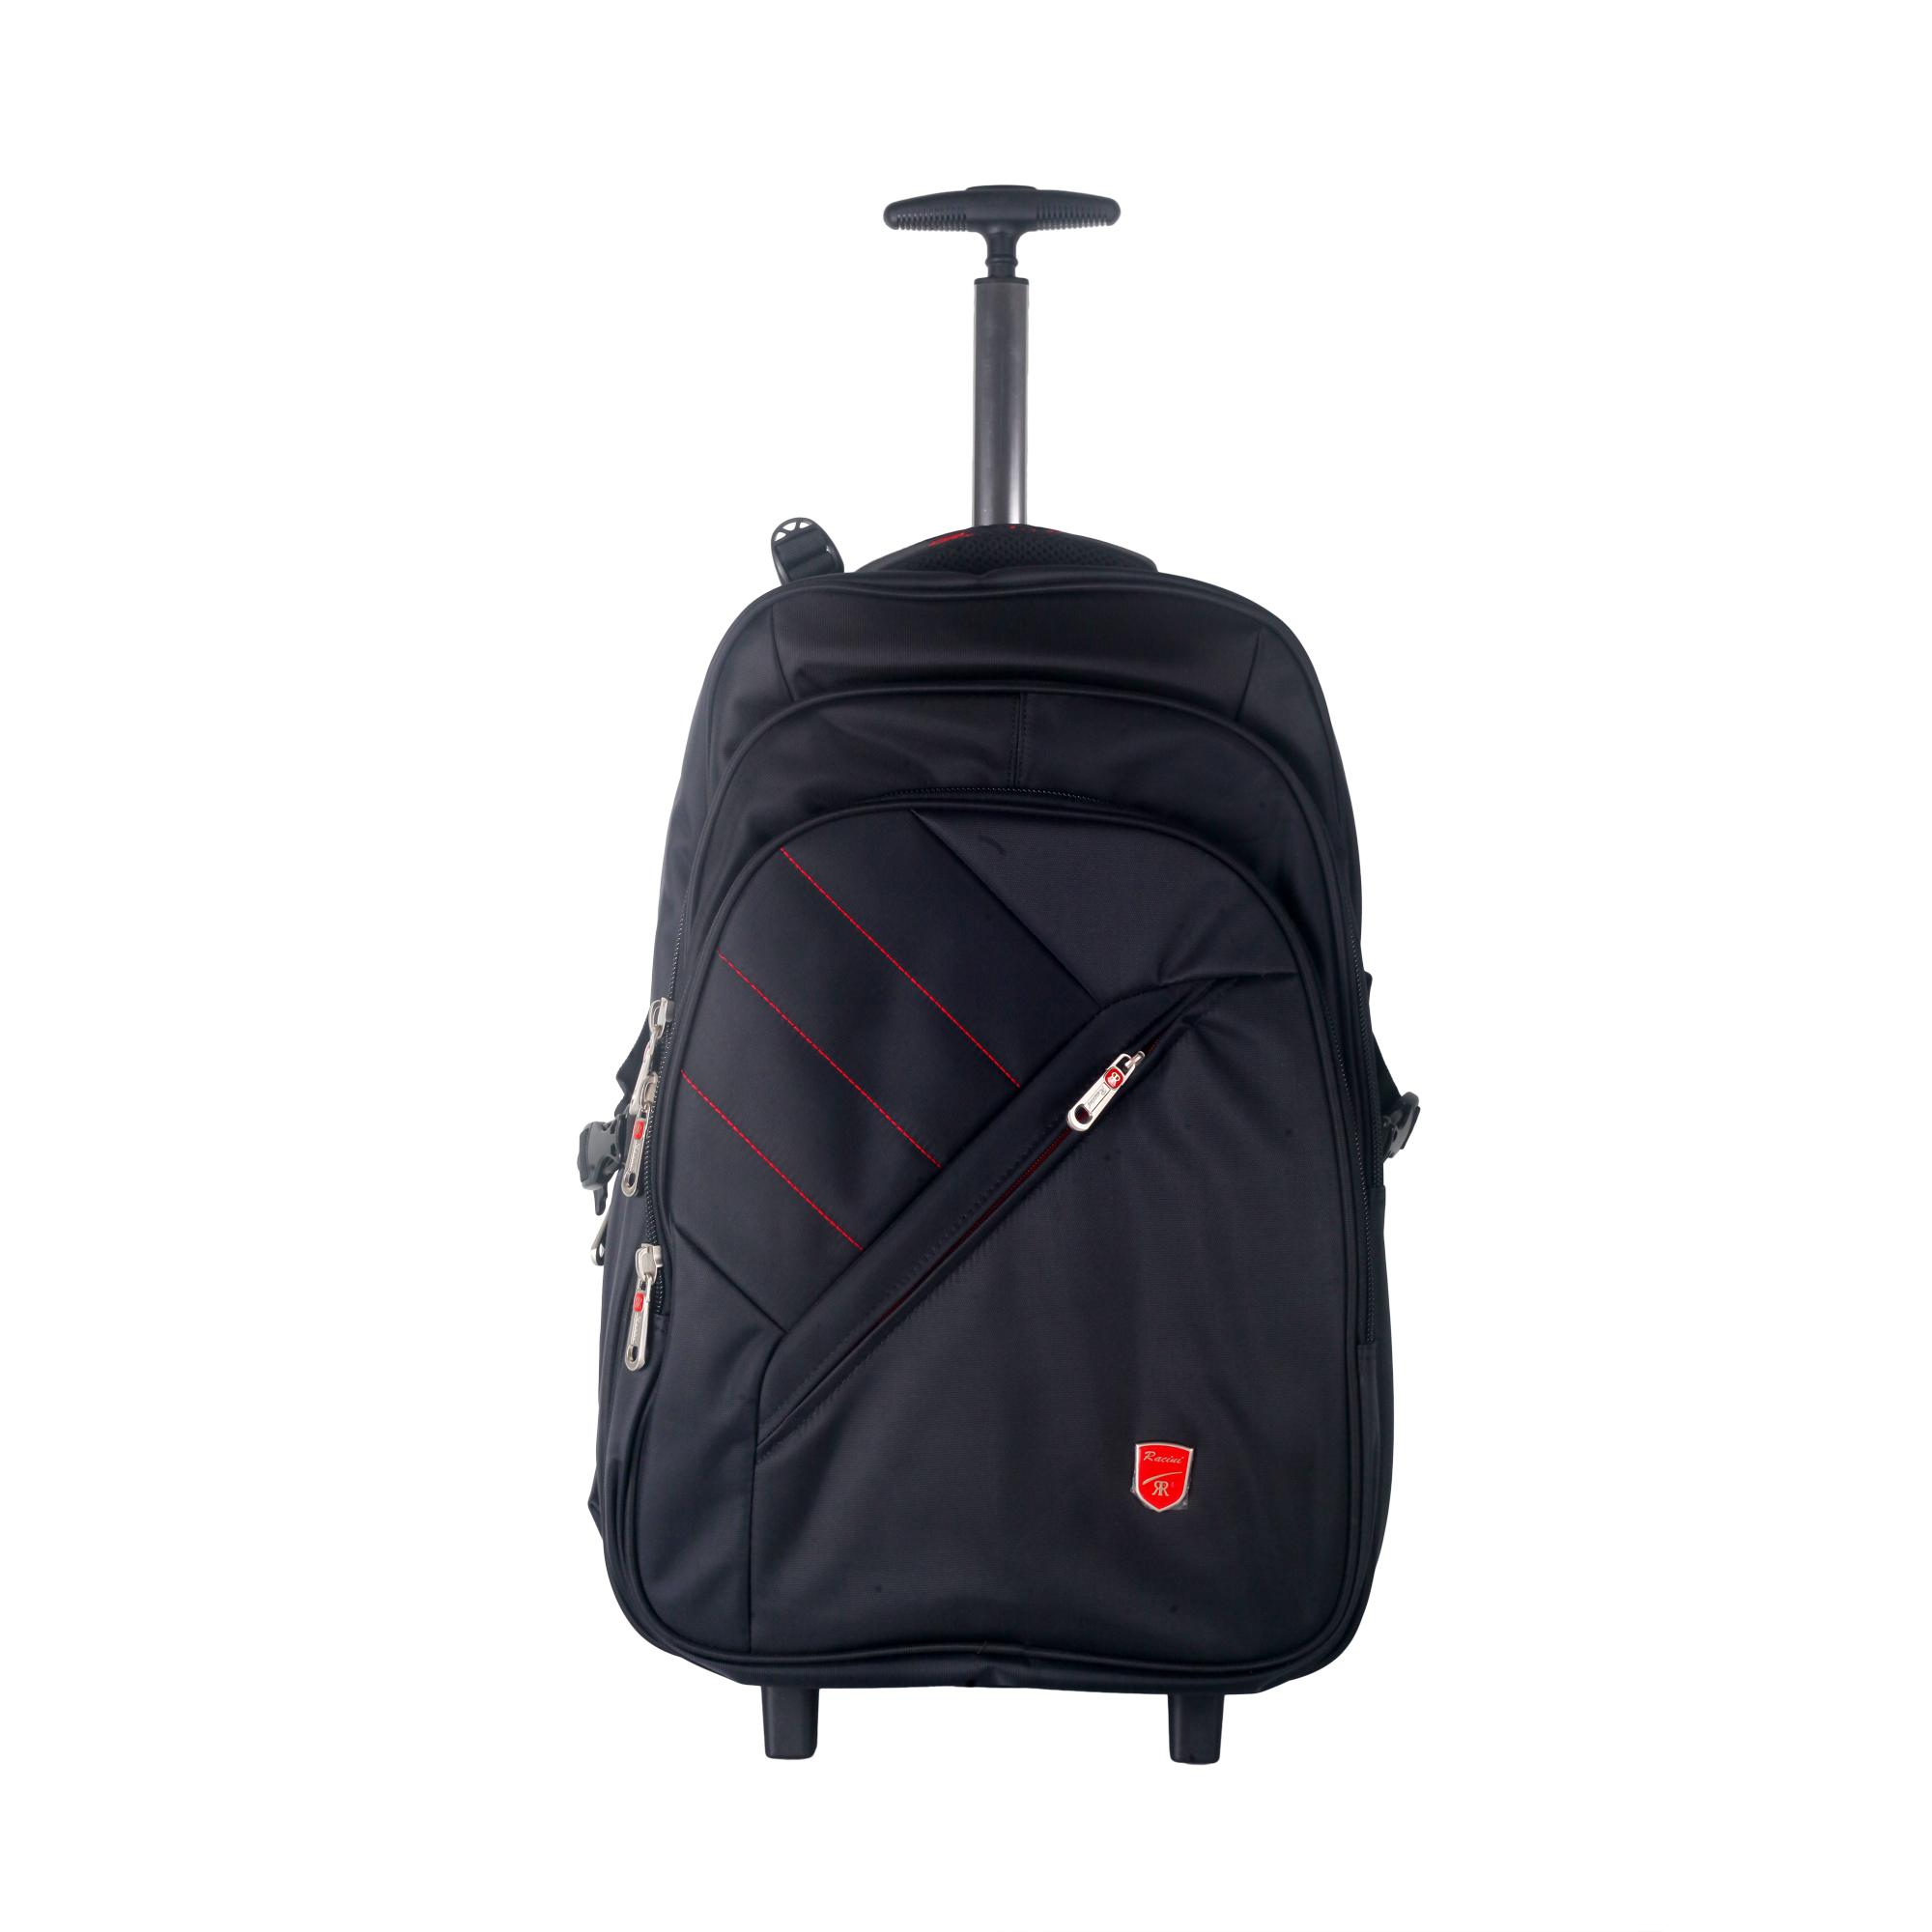 Luggage for sale - Luggage Bag online brands, prices & reviews in Philippines | www.bagssaleusa.com